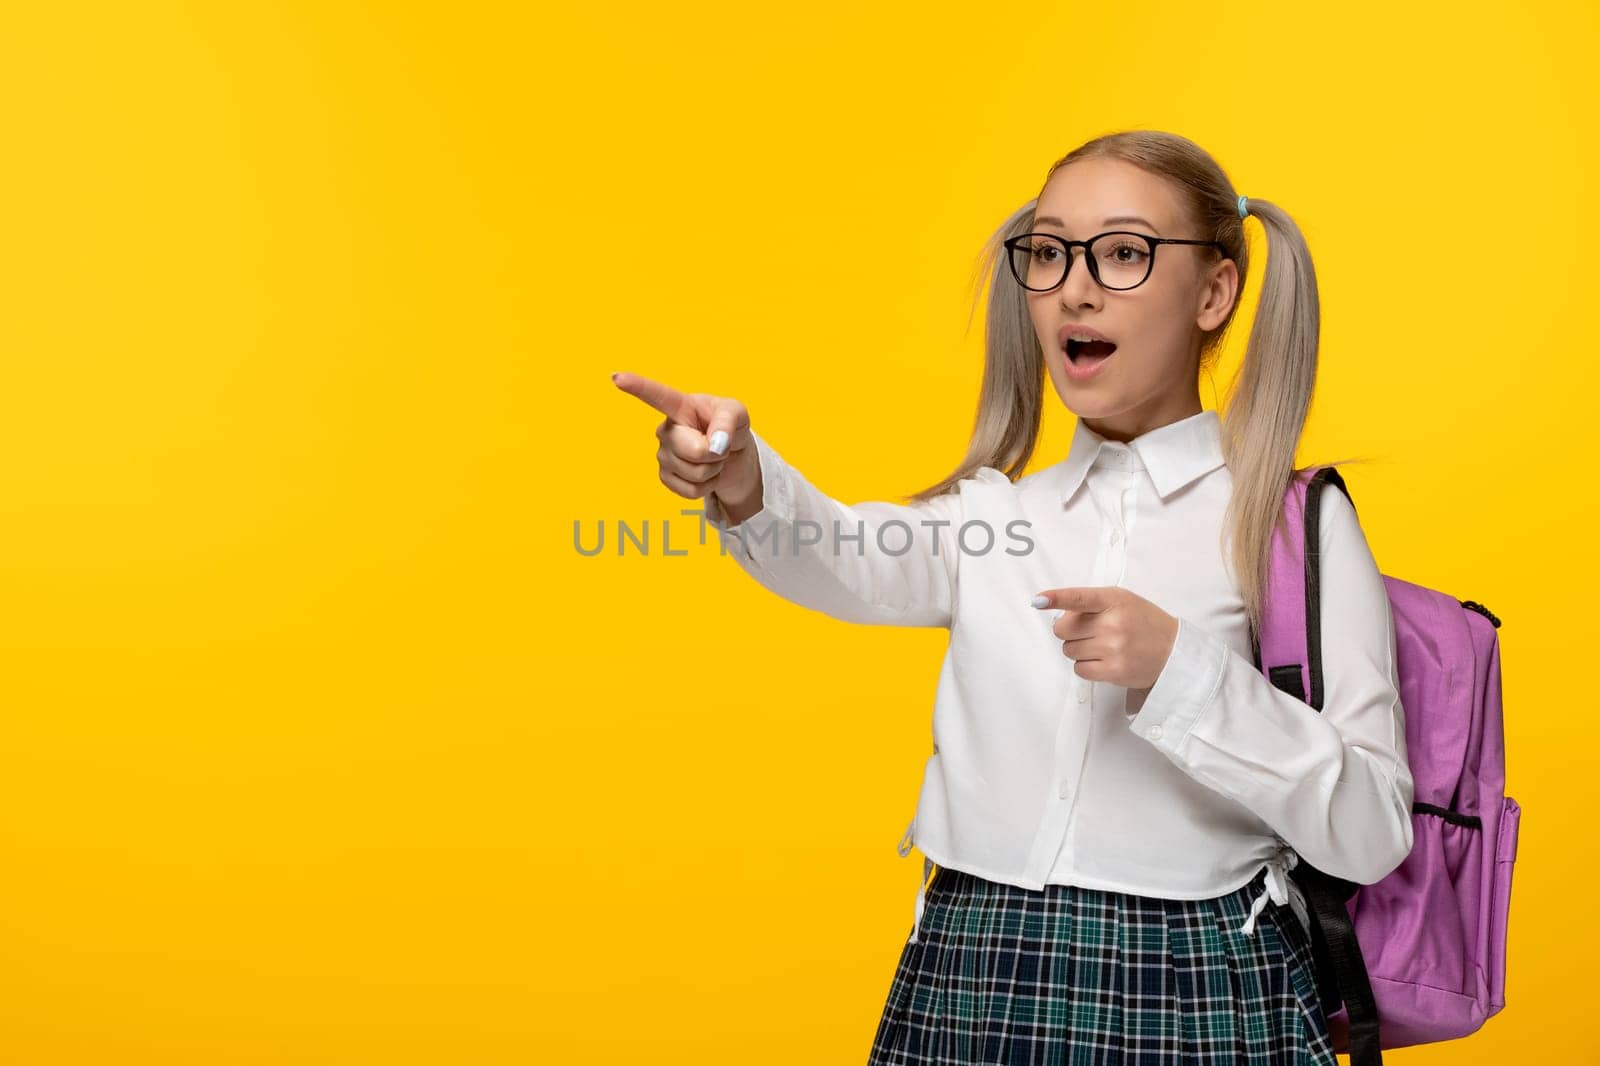 world book day blonde schoolgirl pointing front wearing glasses in uniform